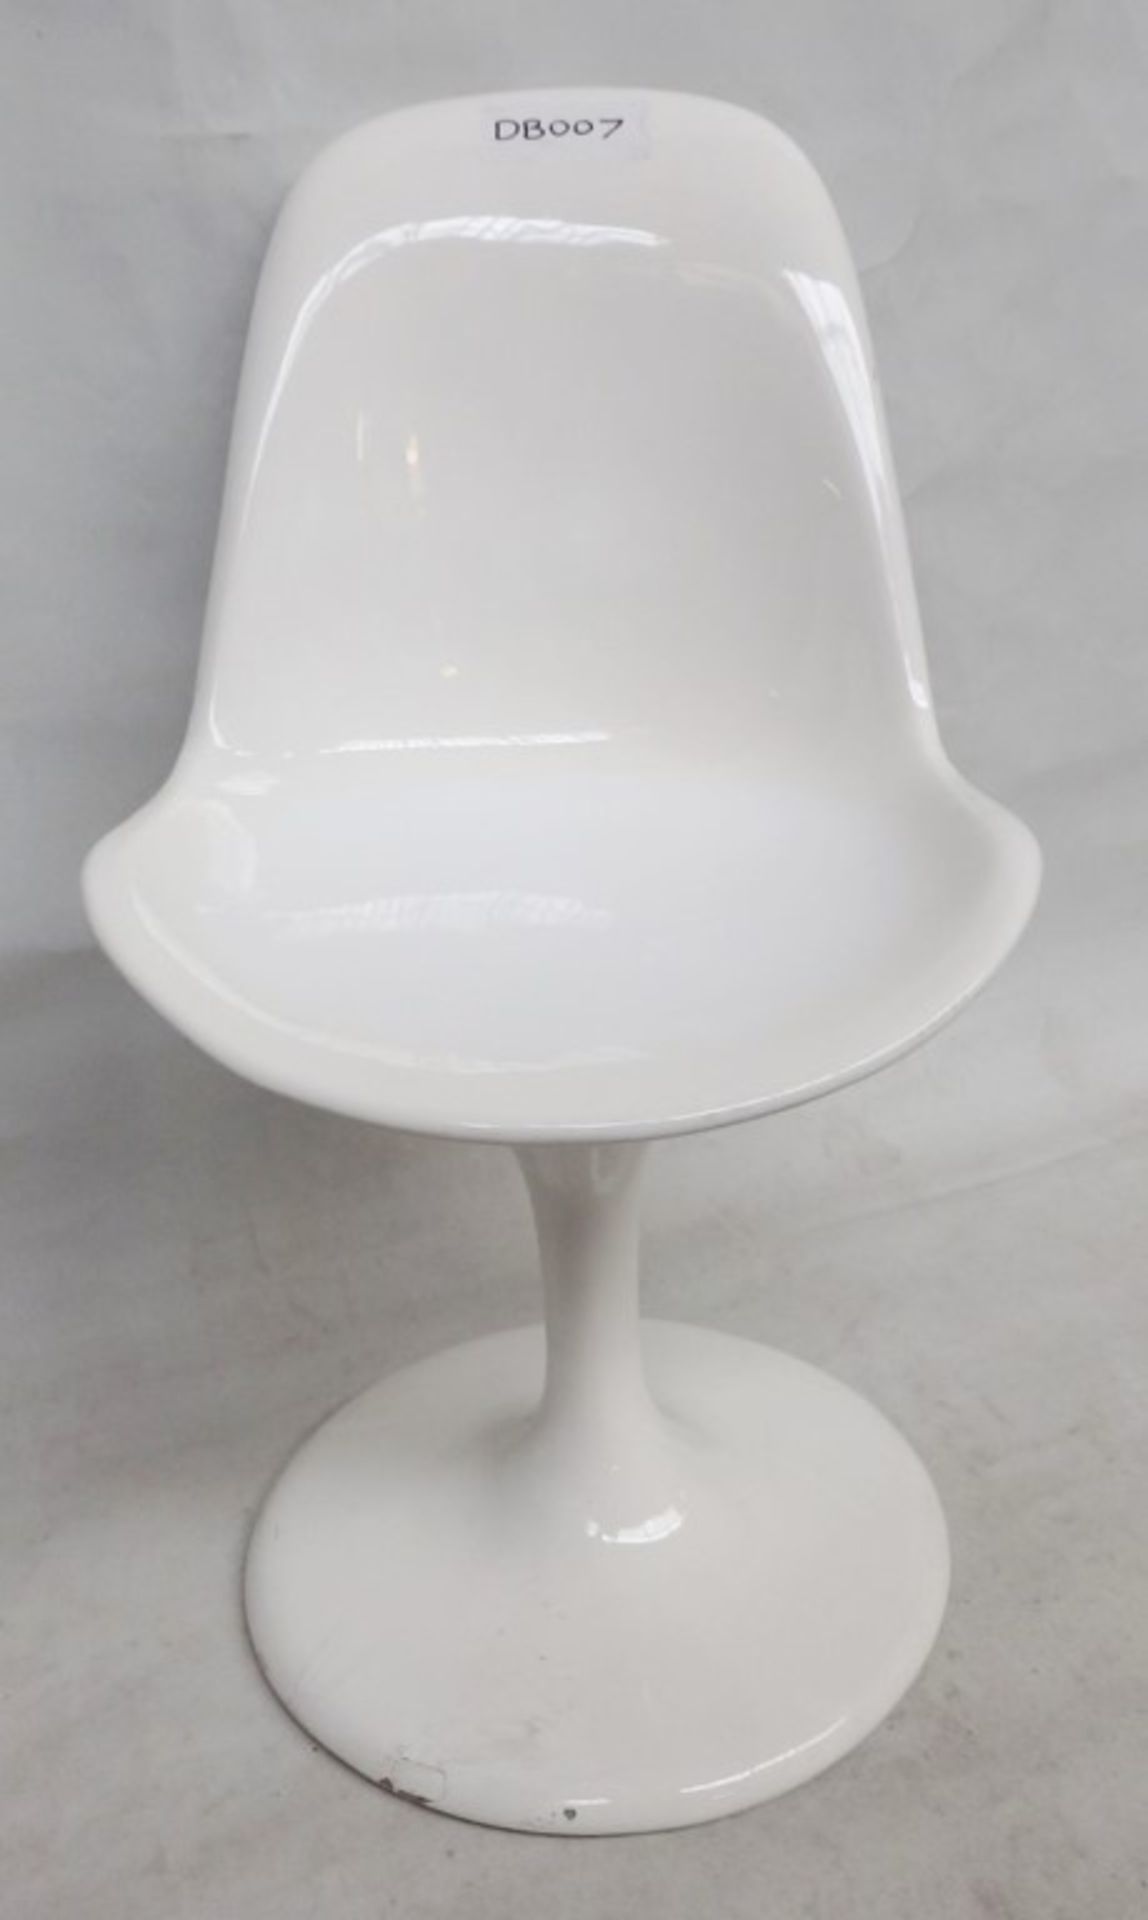 1 x Retro Style Swivel Chair With A White Hi-gloss Finish - Includes Cushion As Shown - - Image 8 of 14